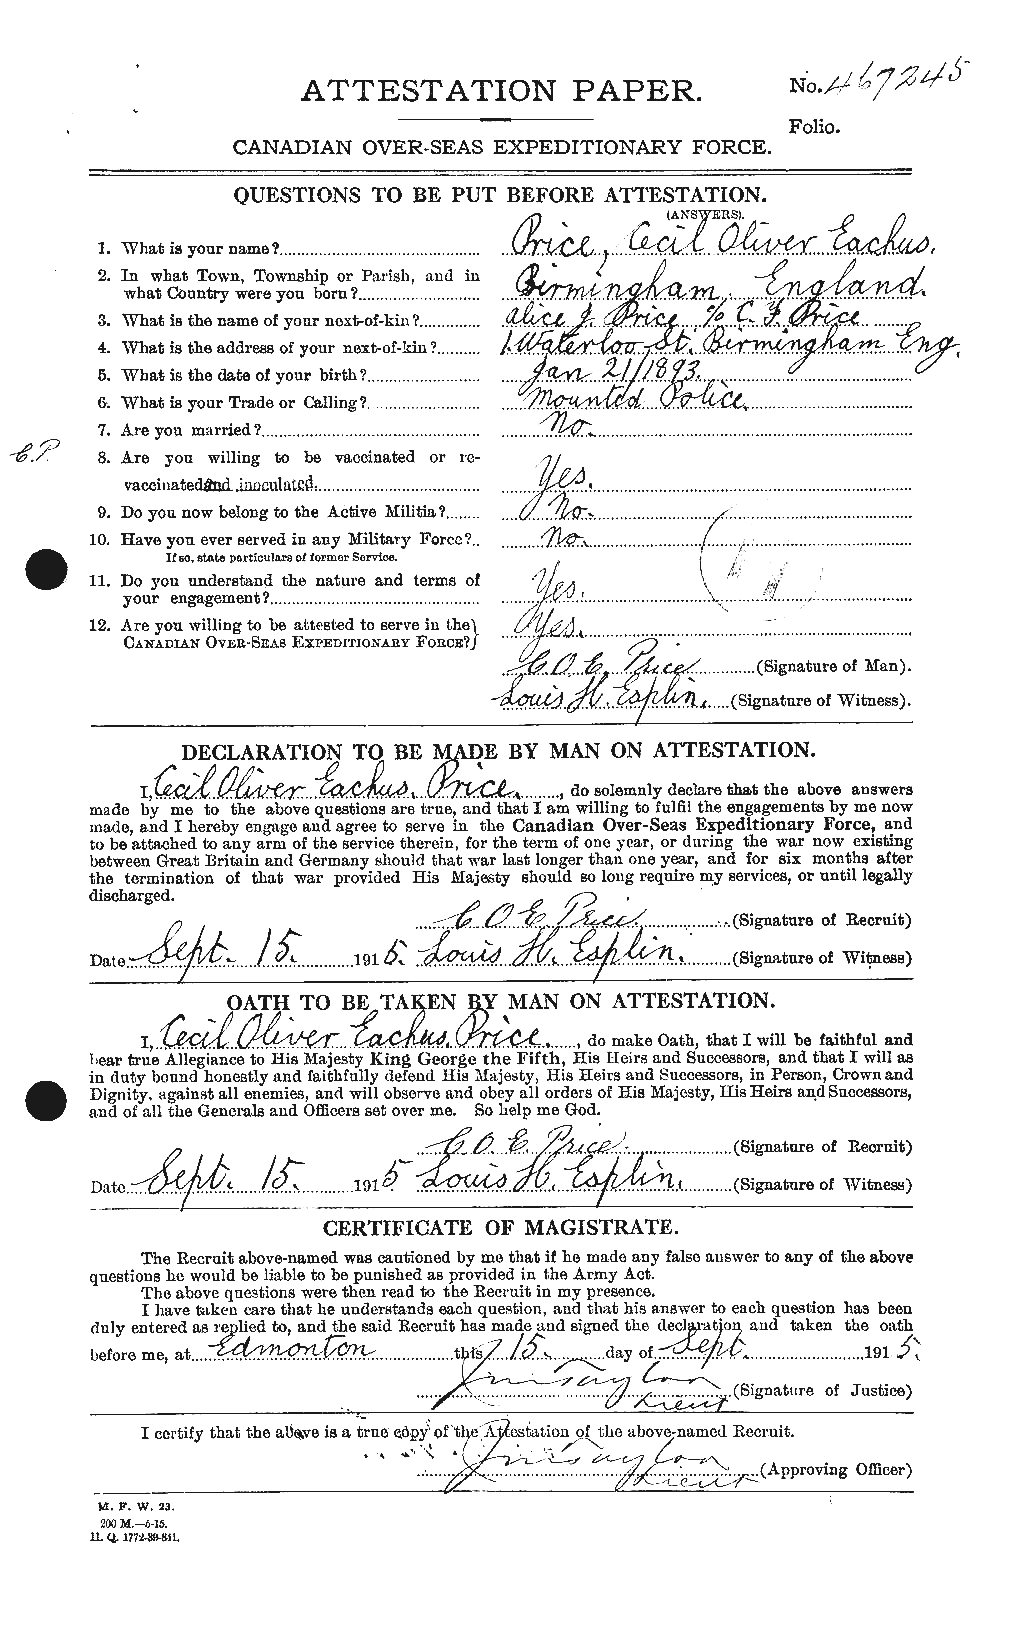 Personnel Records of the First World War - CEF 586959a